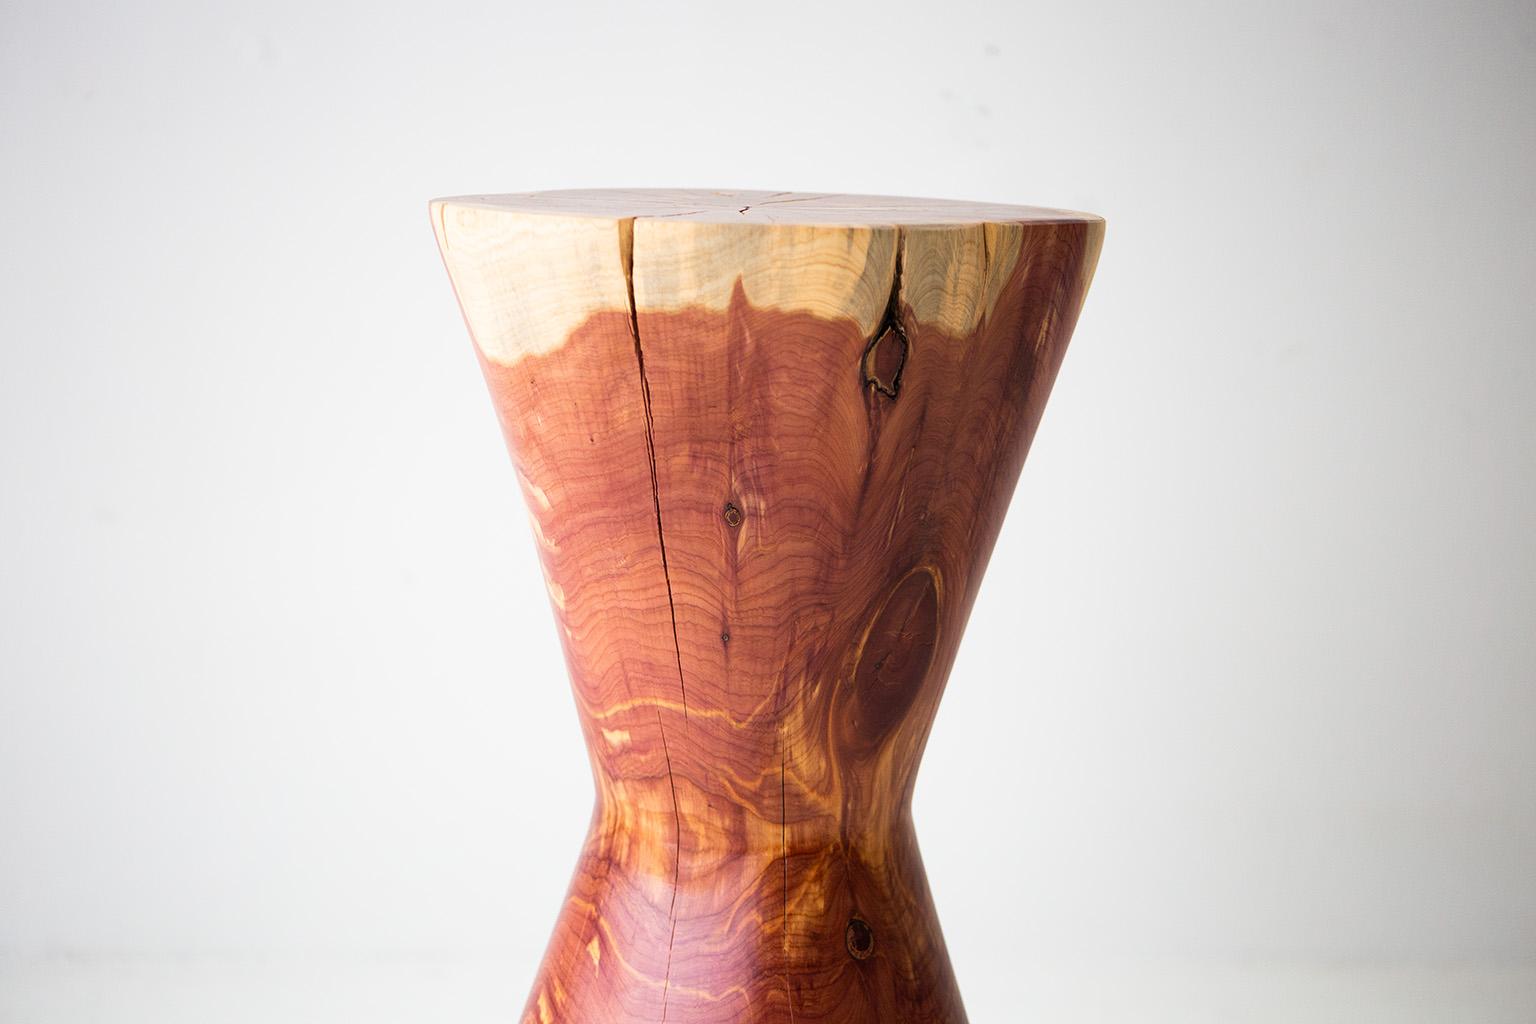 Please scroll down to read IMPORTANT INSTRUCTIONS ABOUT OUR STUMPS before purchase!

Why buy our stumps?

KILN DRIED
Our stumps all go through a drying process in our kiln, sometimes for up to a month. We are meticulous with bringing each and every